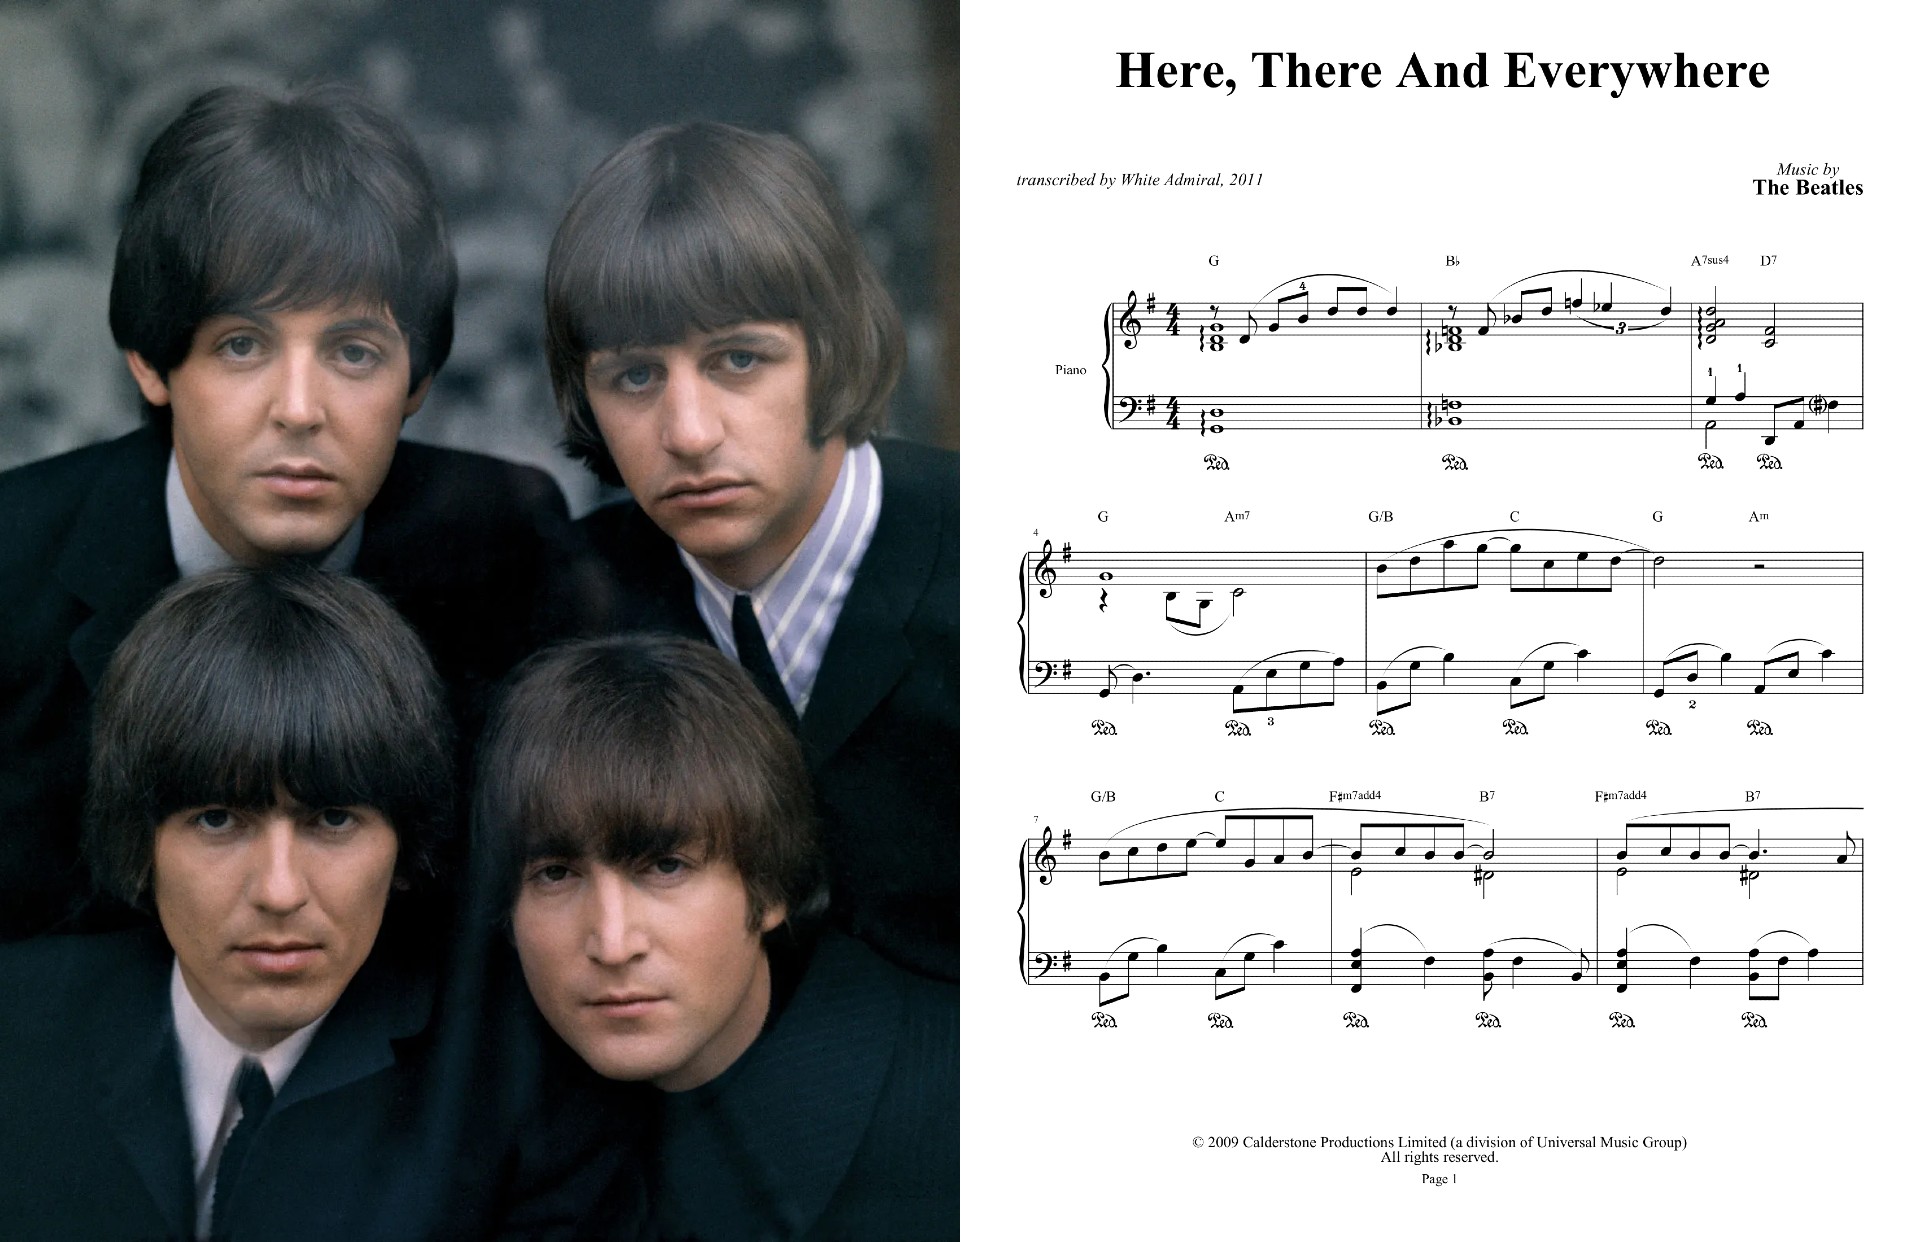 Here, There And Everywhere - The Beatles.jpg